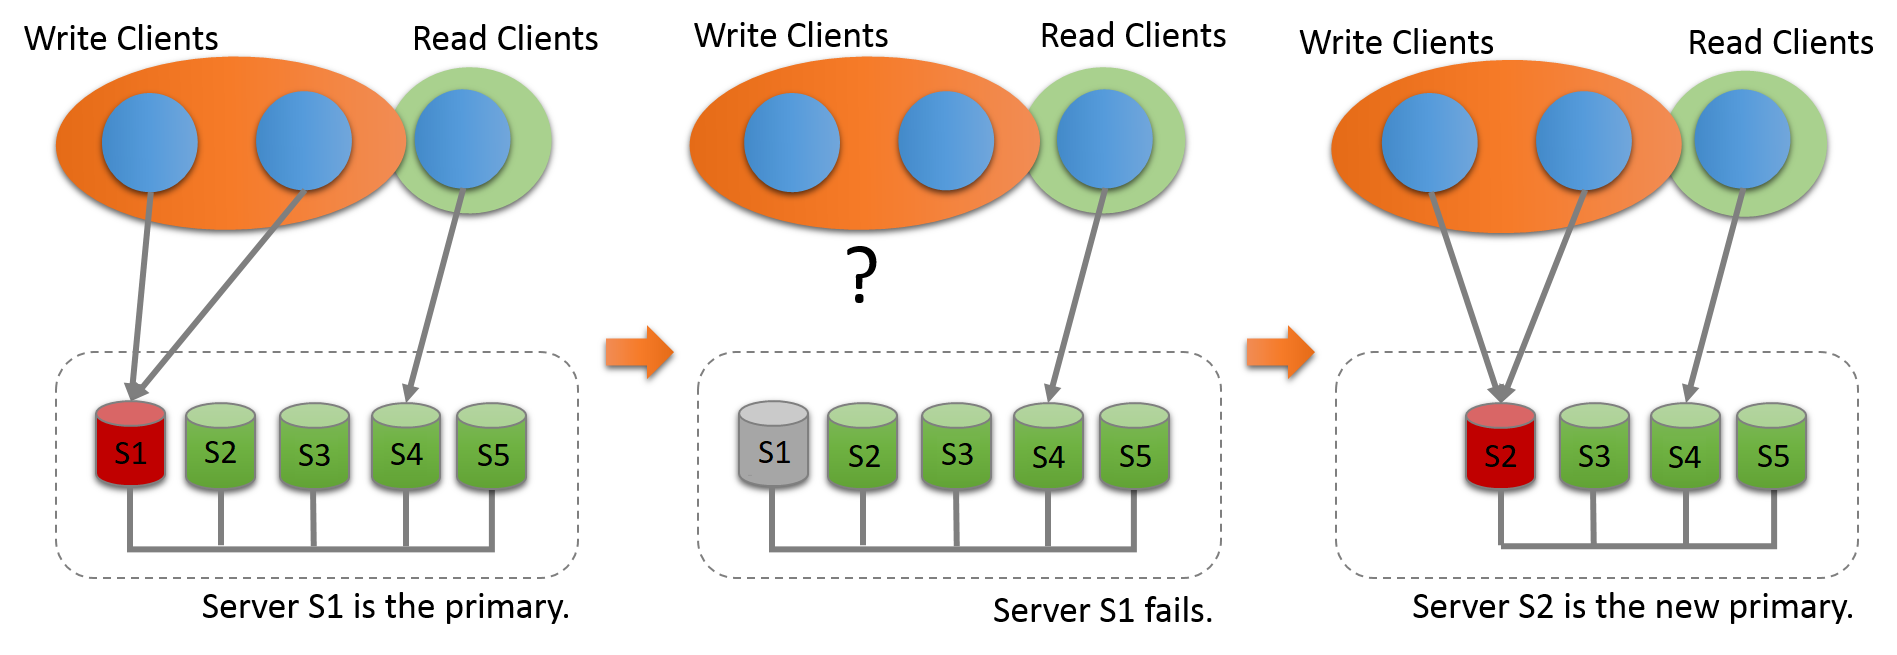 Five server instances, S1, S2, S3, S4, and S5, are deployed as an interconnected group. Server S1 is the primary. Write clients are communicating with server S1, and a read client is communicating with server S4. Server S1 then fails, breaking communication with the write clients. Server S2 then takes over as the new primary, and the write clients now communicate with server S2.